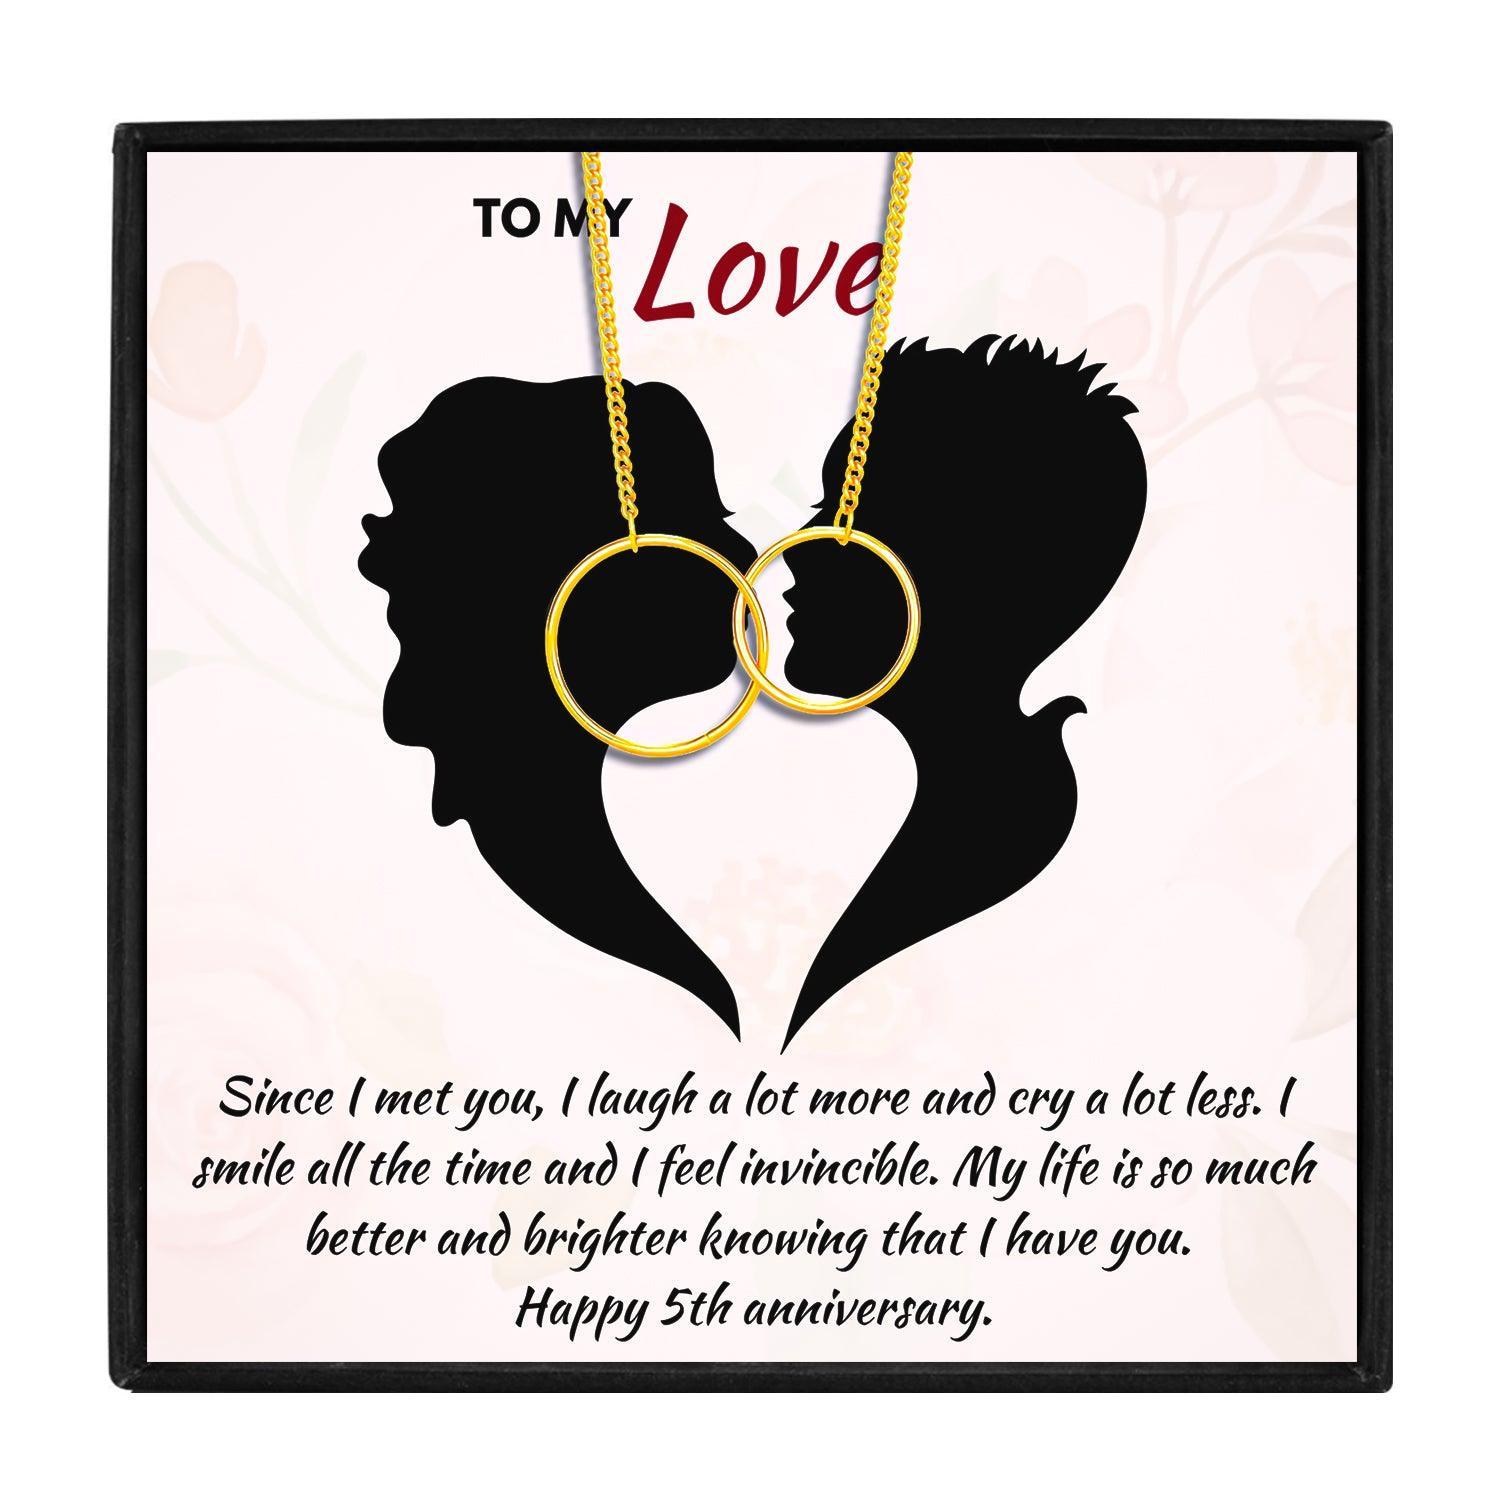 5 Year Dating Anniversary Gift Ideas in 2023 | 5 Year Dating Anniversary Gift Ideas - undefined | 5 year wedding gift, 5th anniversary gift for wife, 5th wedding anniversary gift ideas, Romantic Anniversary Gift For Wife | From Hunny Life | hunnylife.com